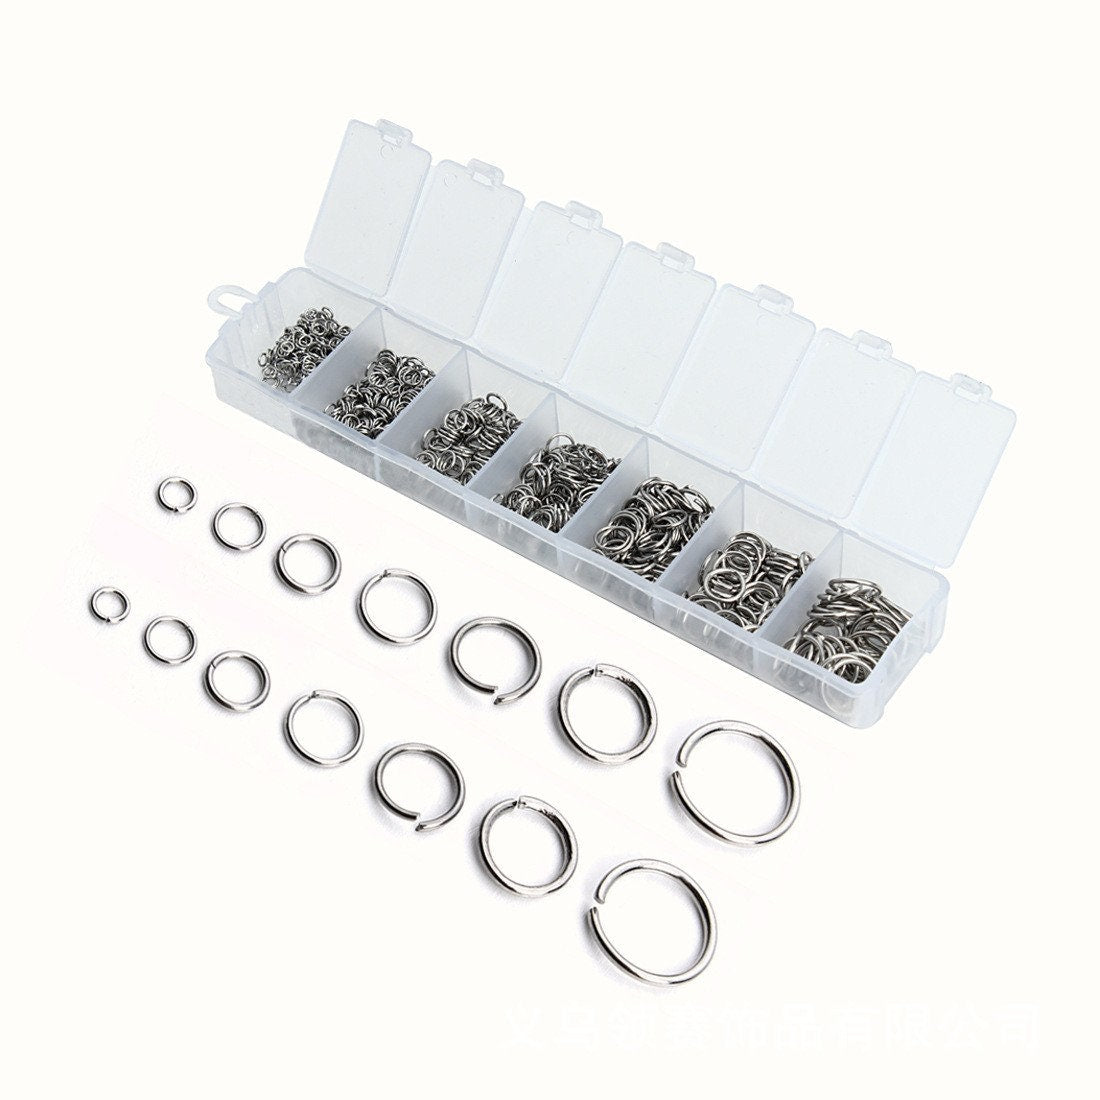 Jump ring starter kit, 770pcs assorted sizes, Stainless steel jewelry findings